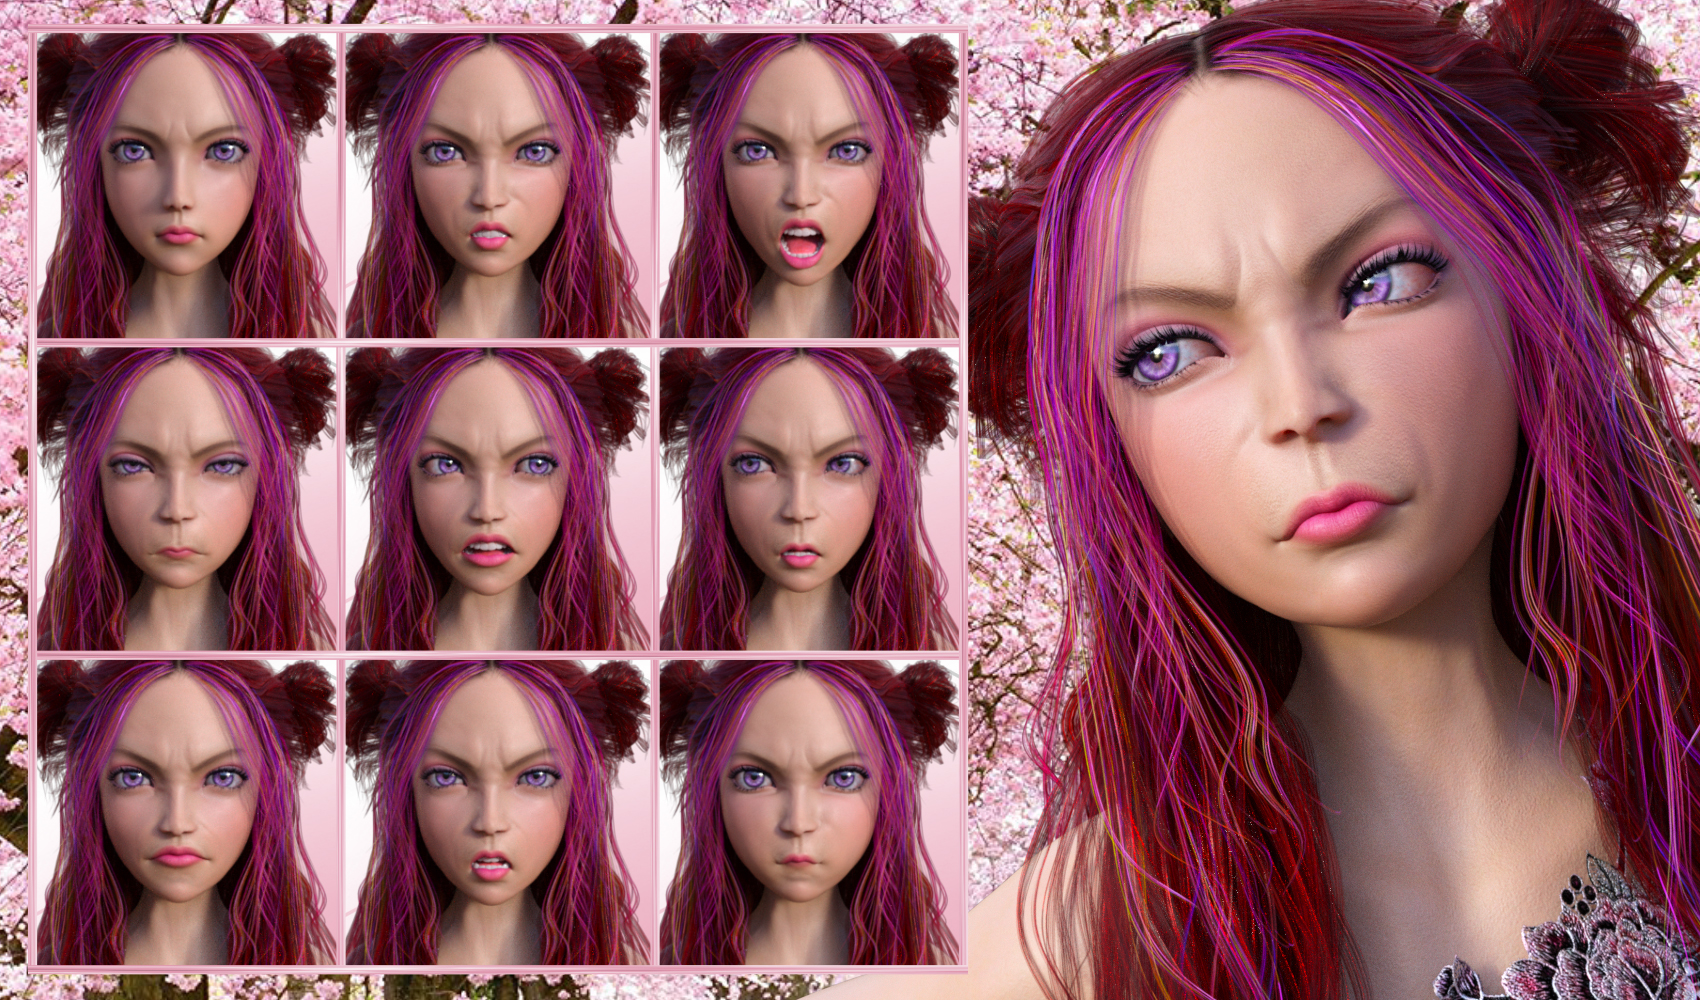 My Style - Expressions for Genesis 8 Female and Kanade 8 by: JWolf, 3D Models by Daz 3D